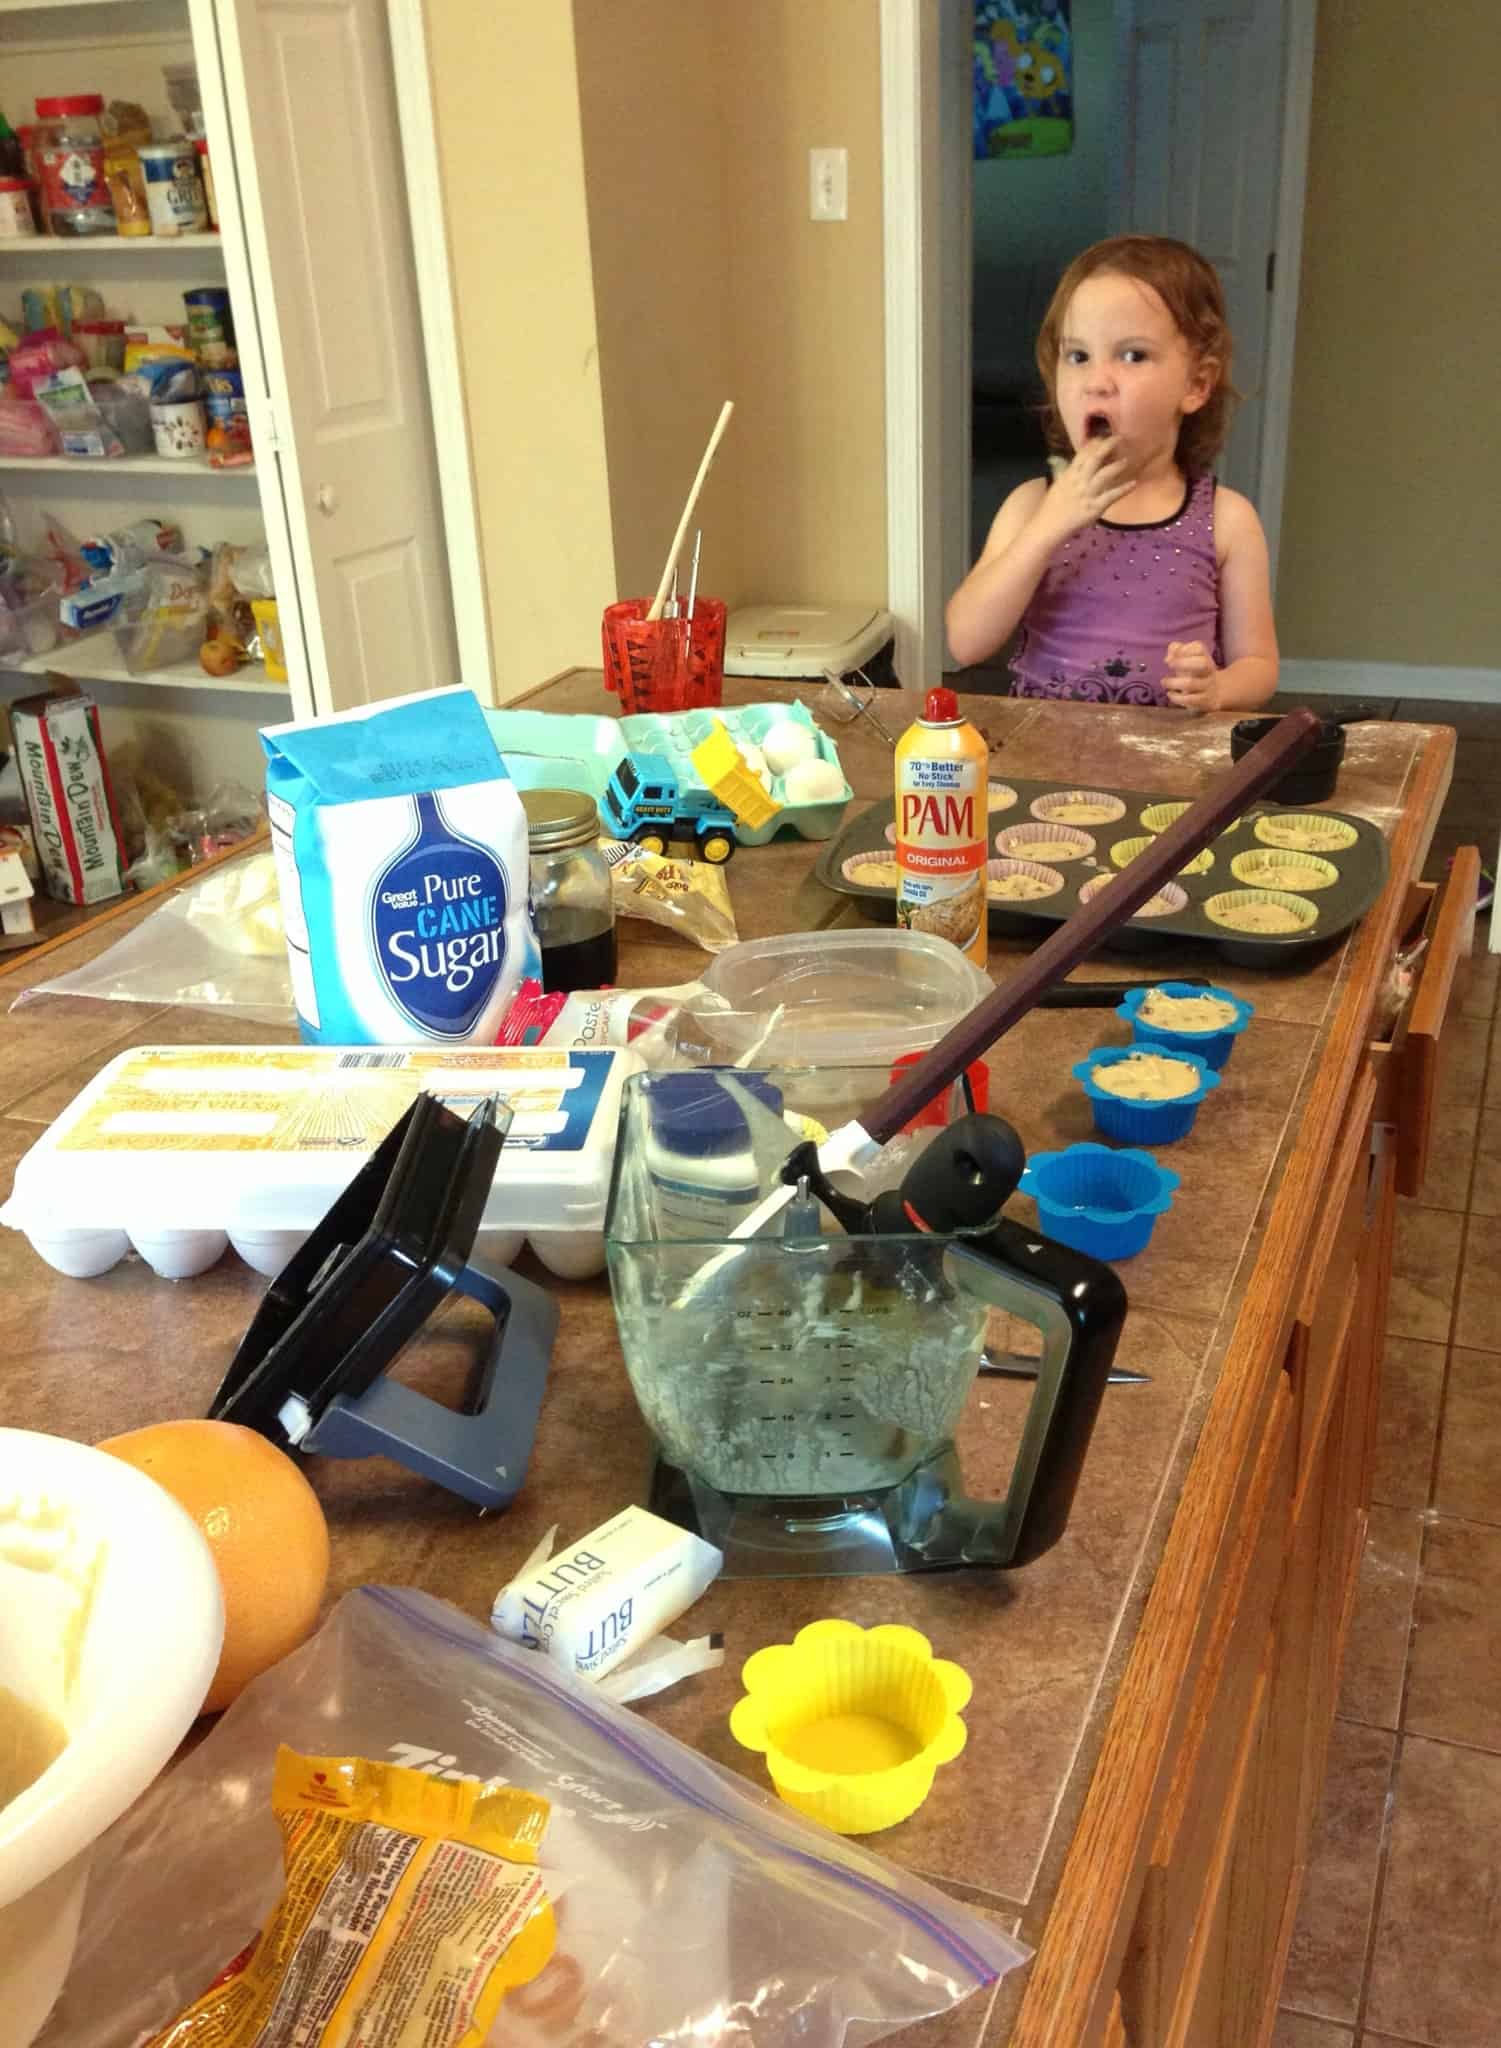 Little girl sitting at a messy counter, baking.